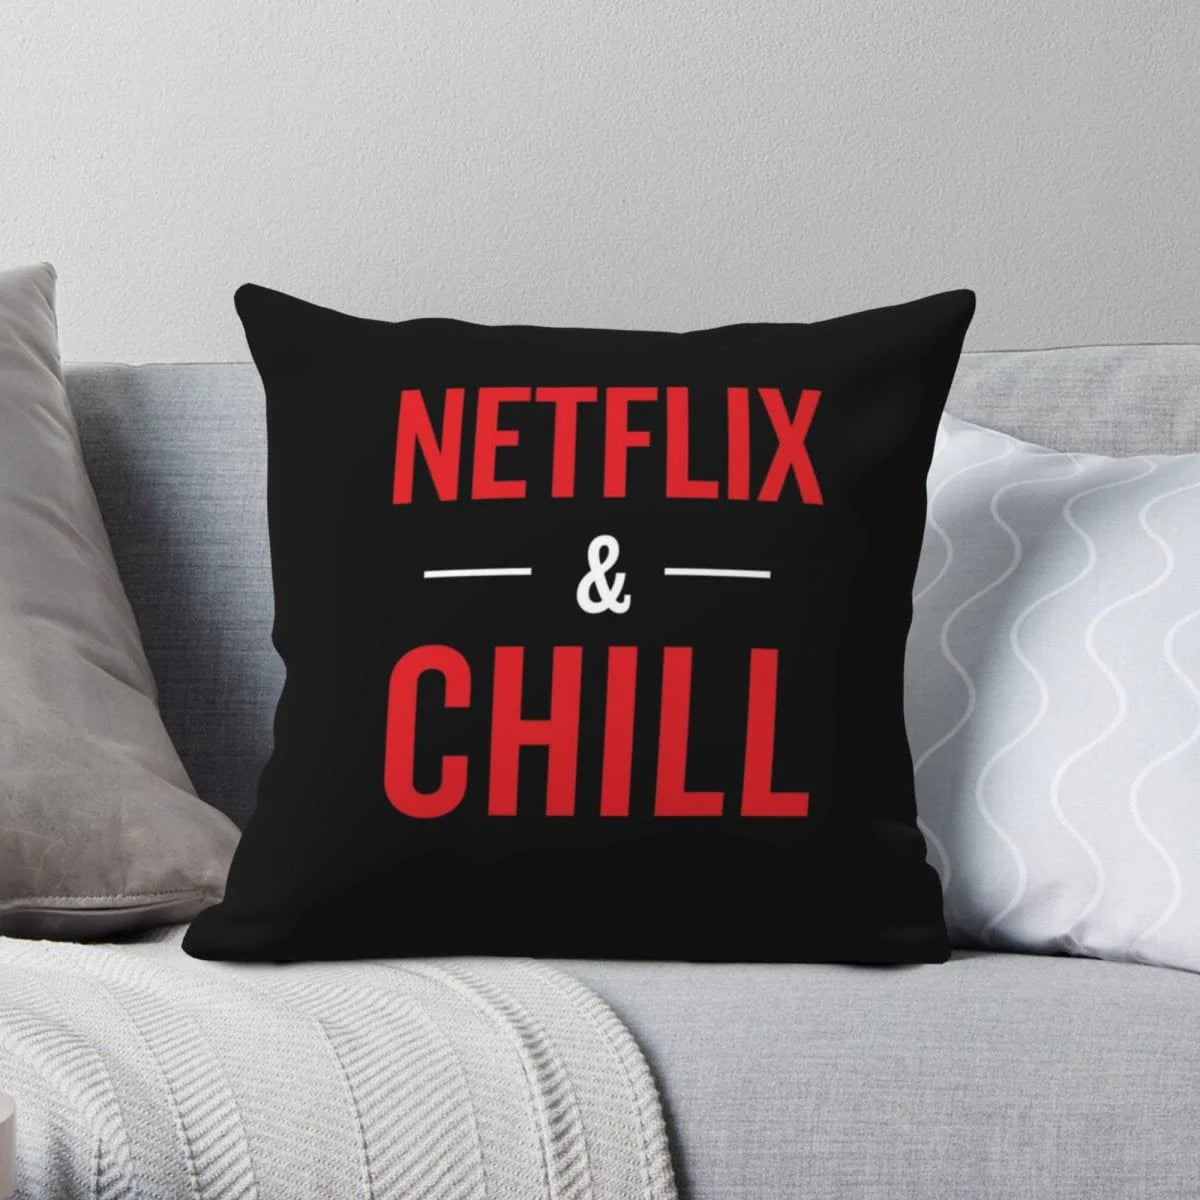 Netflix And Chill Cushion Cover Blackbrdstore